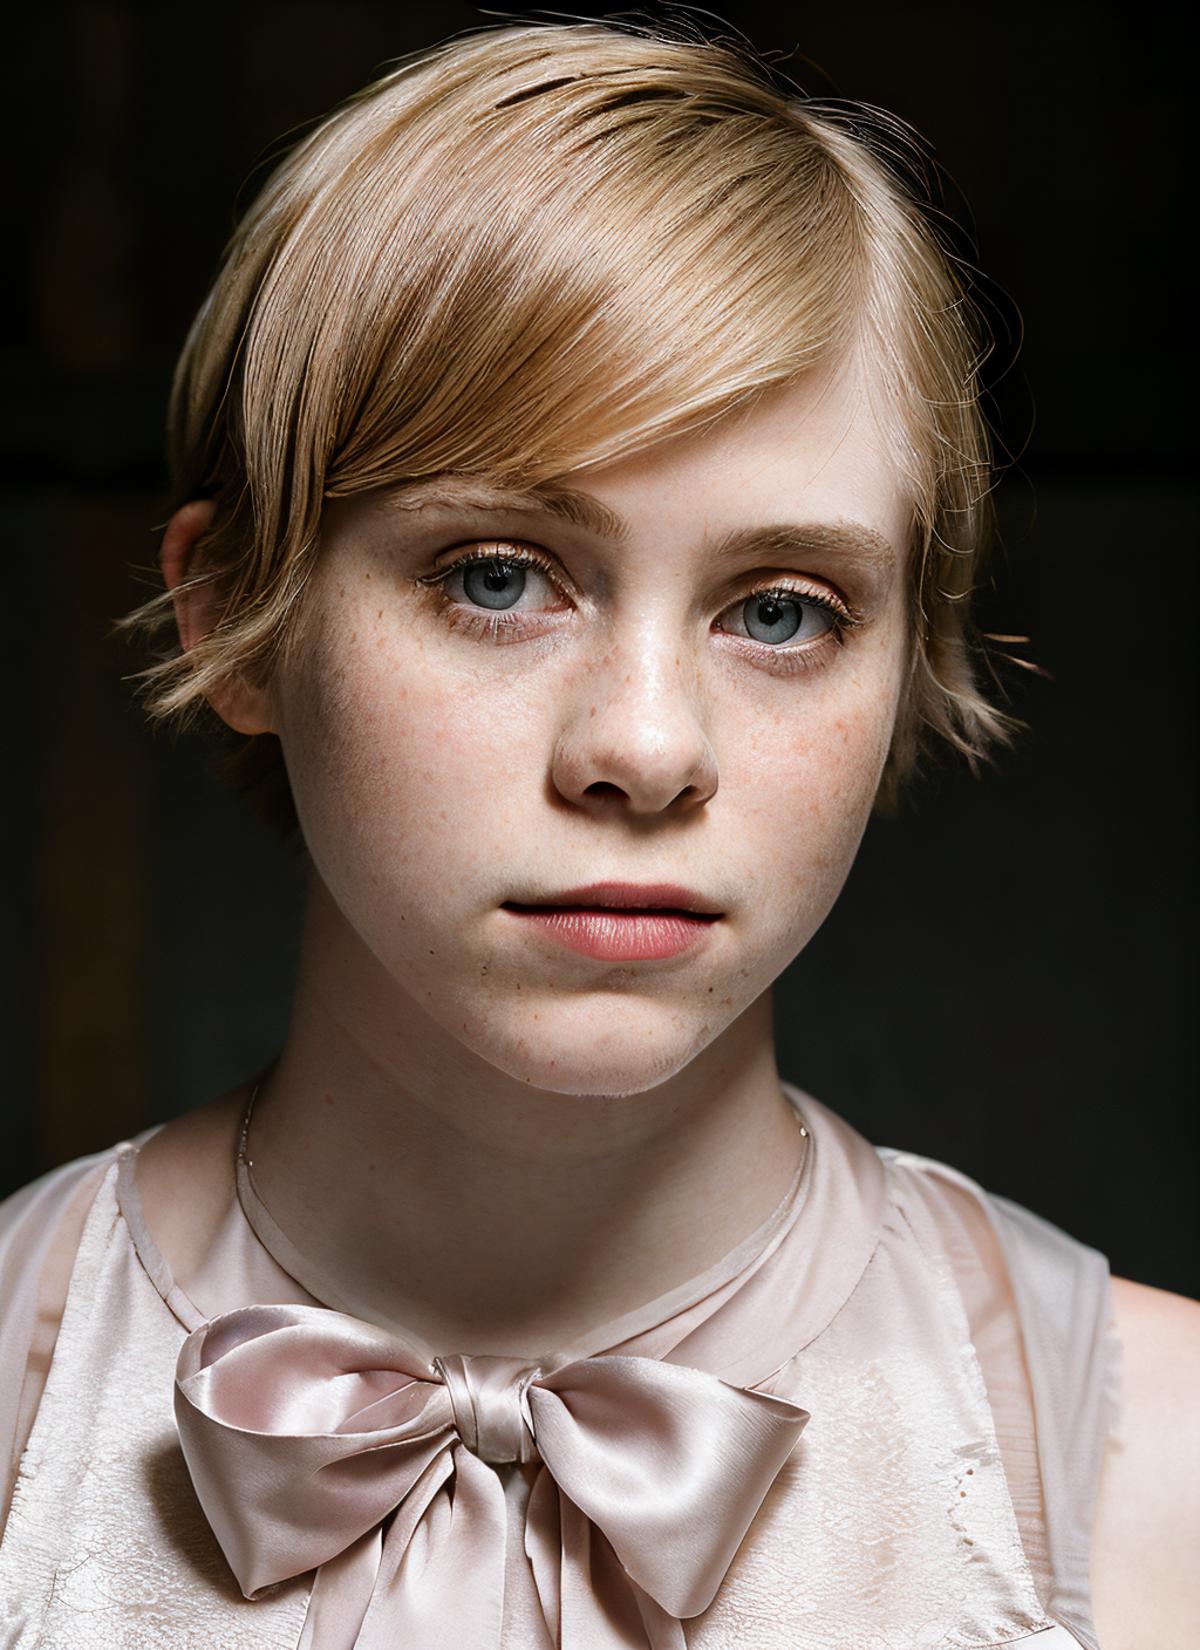 Sophia Lillis (Beverly Marsh on It & Dorec on Dungeons & Dragons: Honor Among Thieves movies) image by wensleyp01